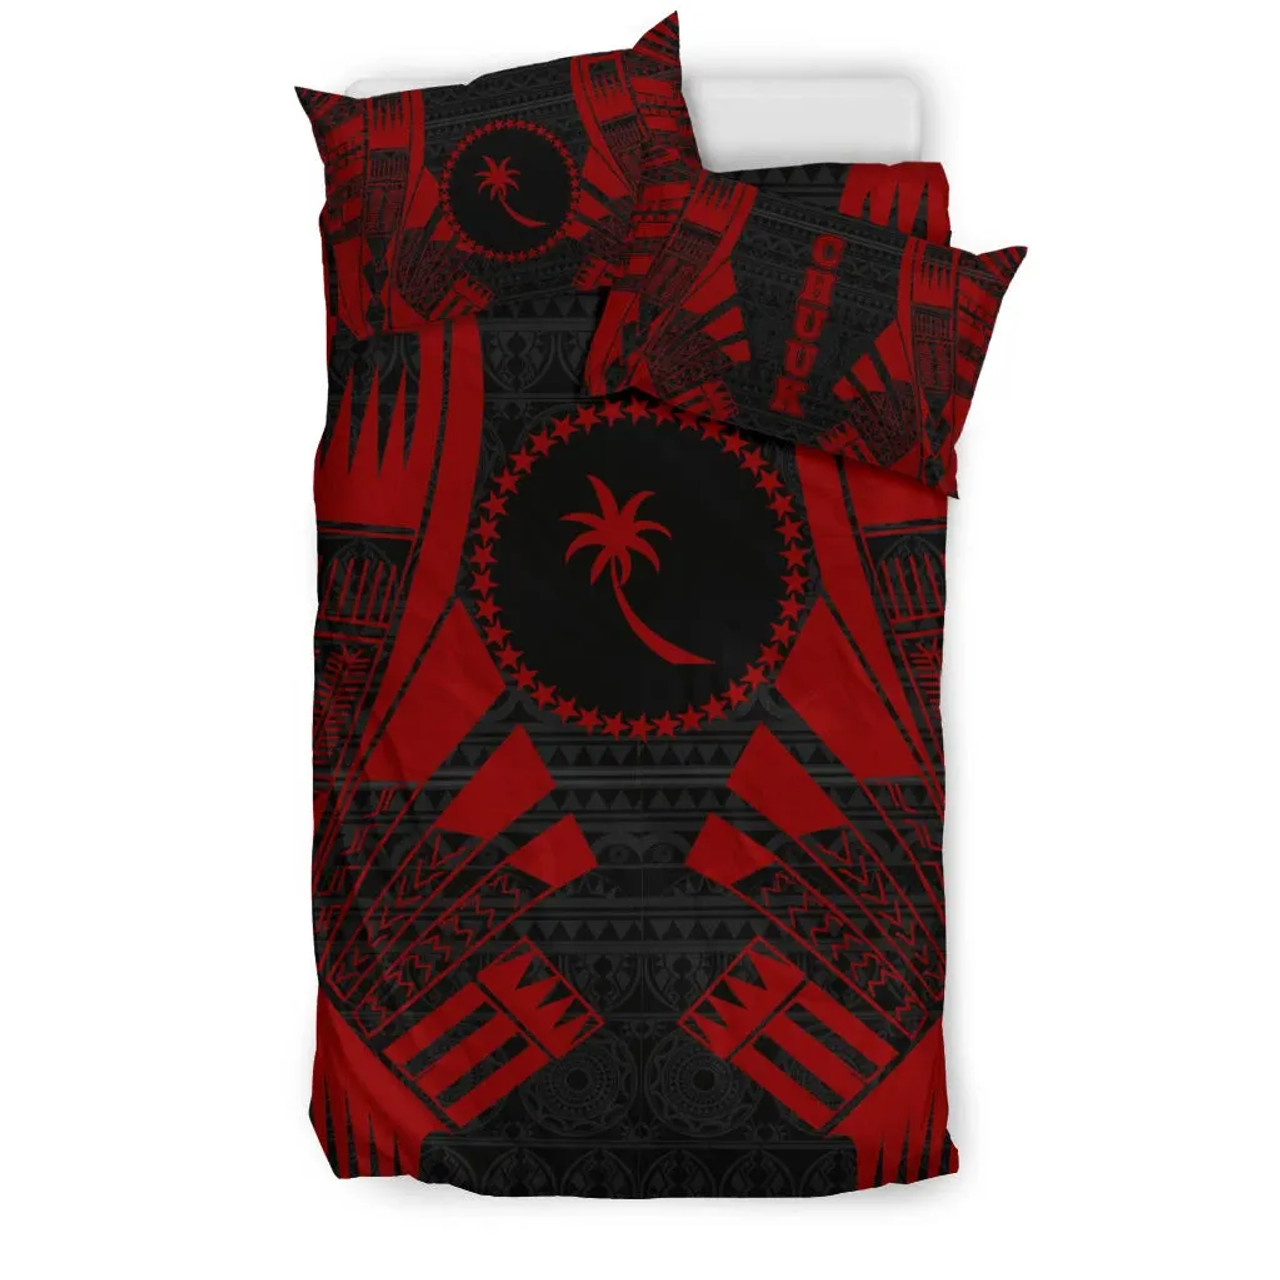 Chuuk States Duvet Cover Set - Red Tattoo Style 3